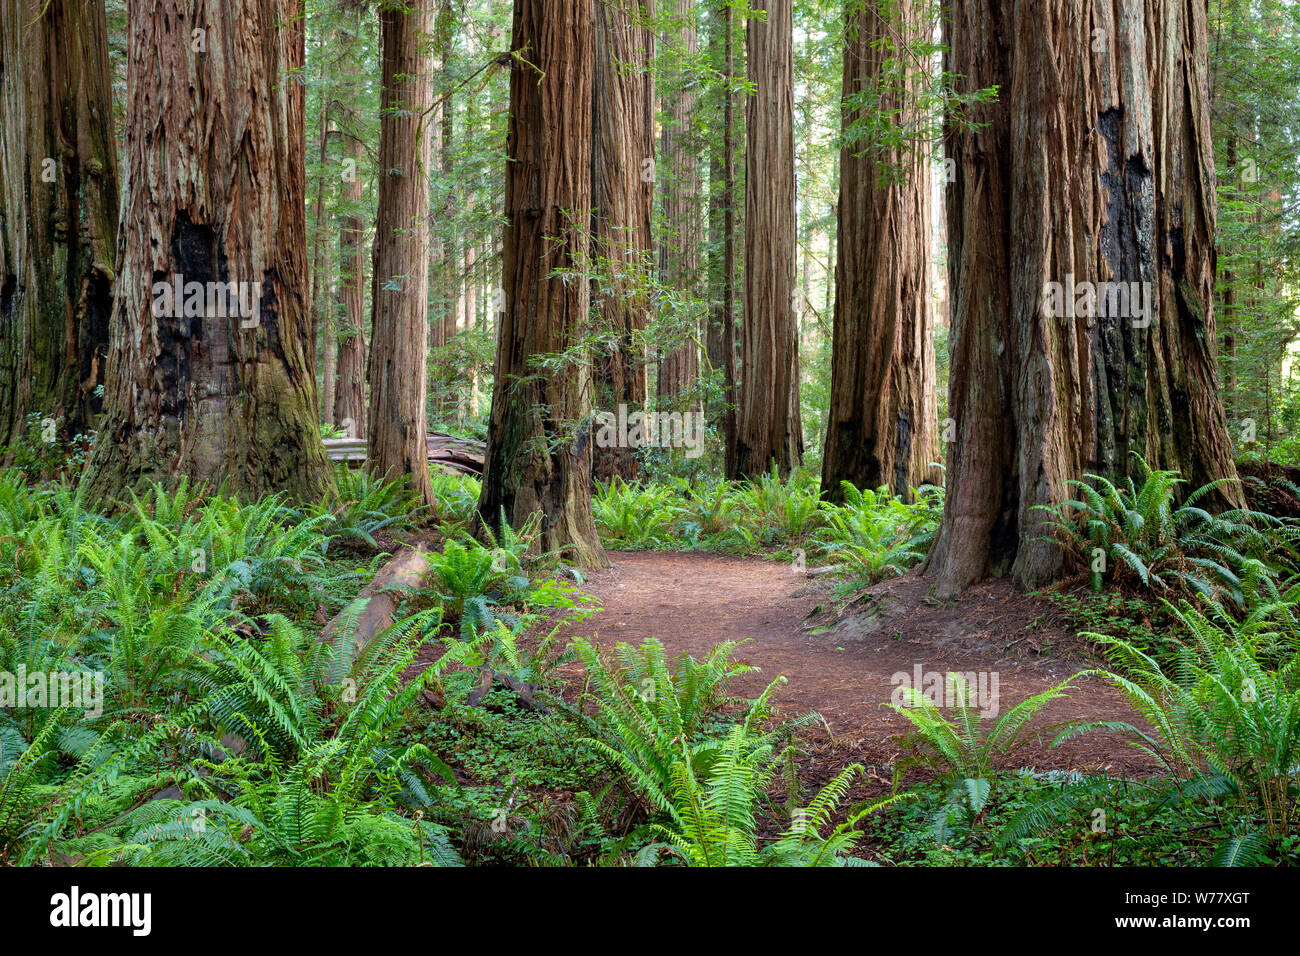 CA03455-00...CALIFORNIA - Stout Grove in Jediah Smith Redwoods State Park along the Redwood Coast. Stock Photo